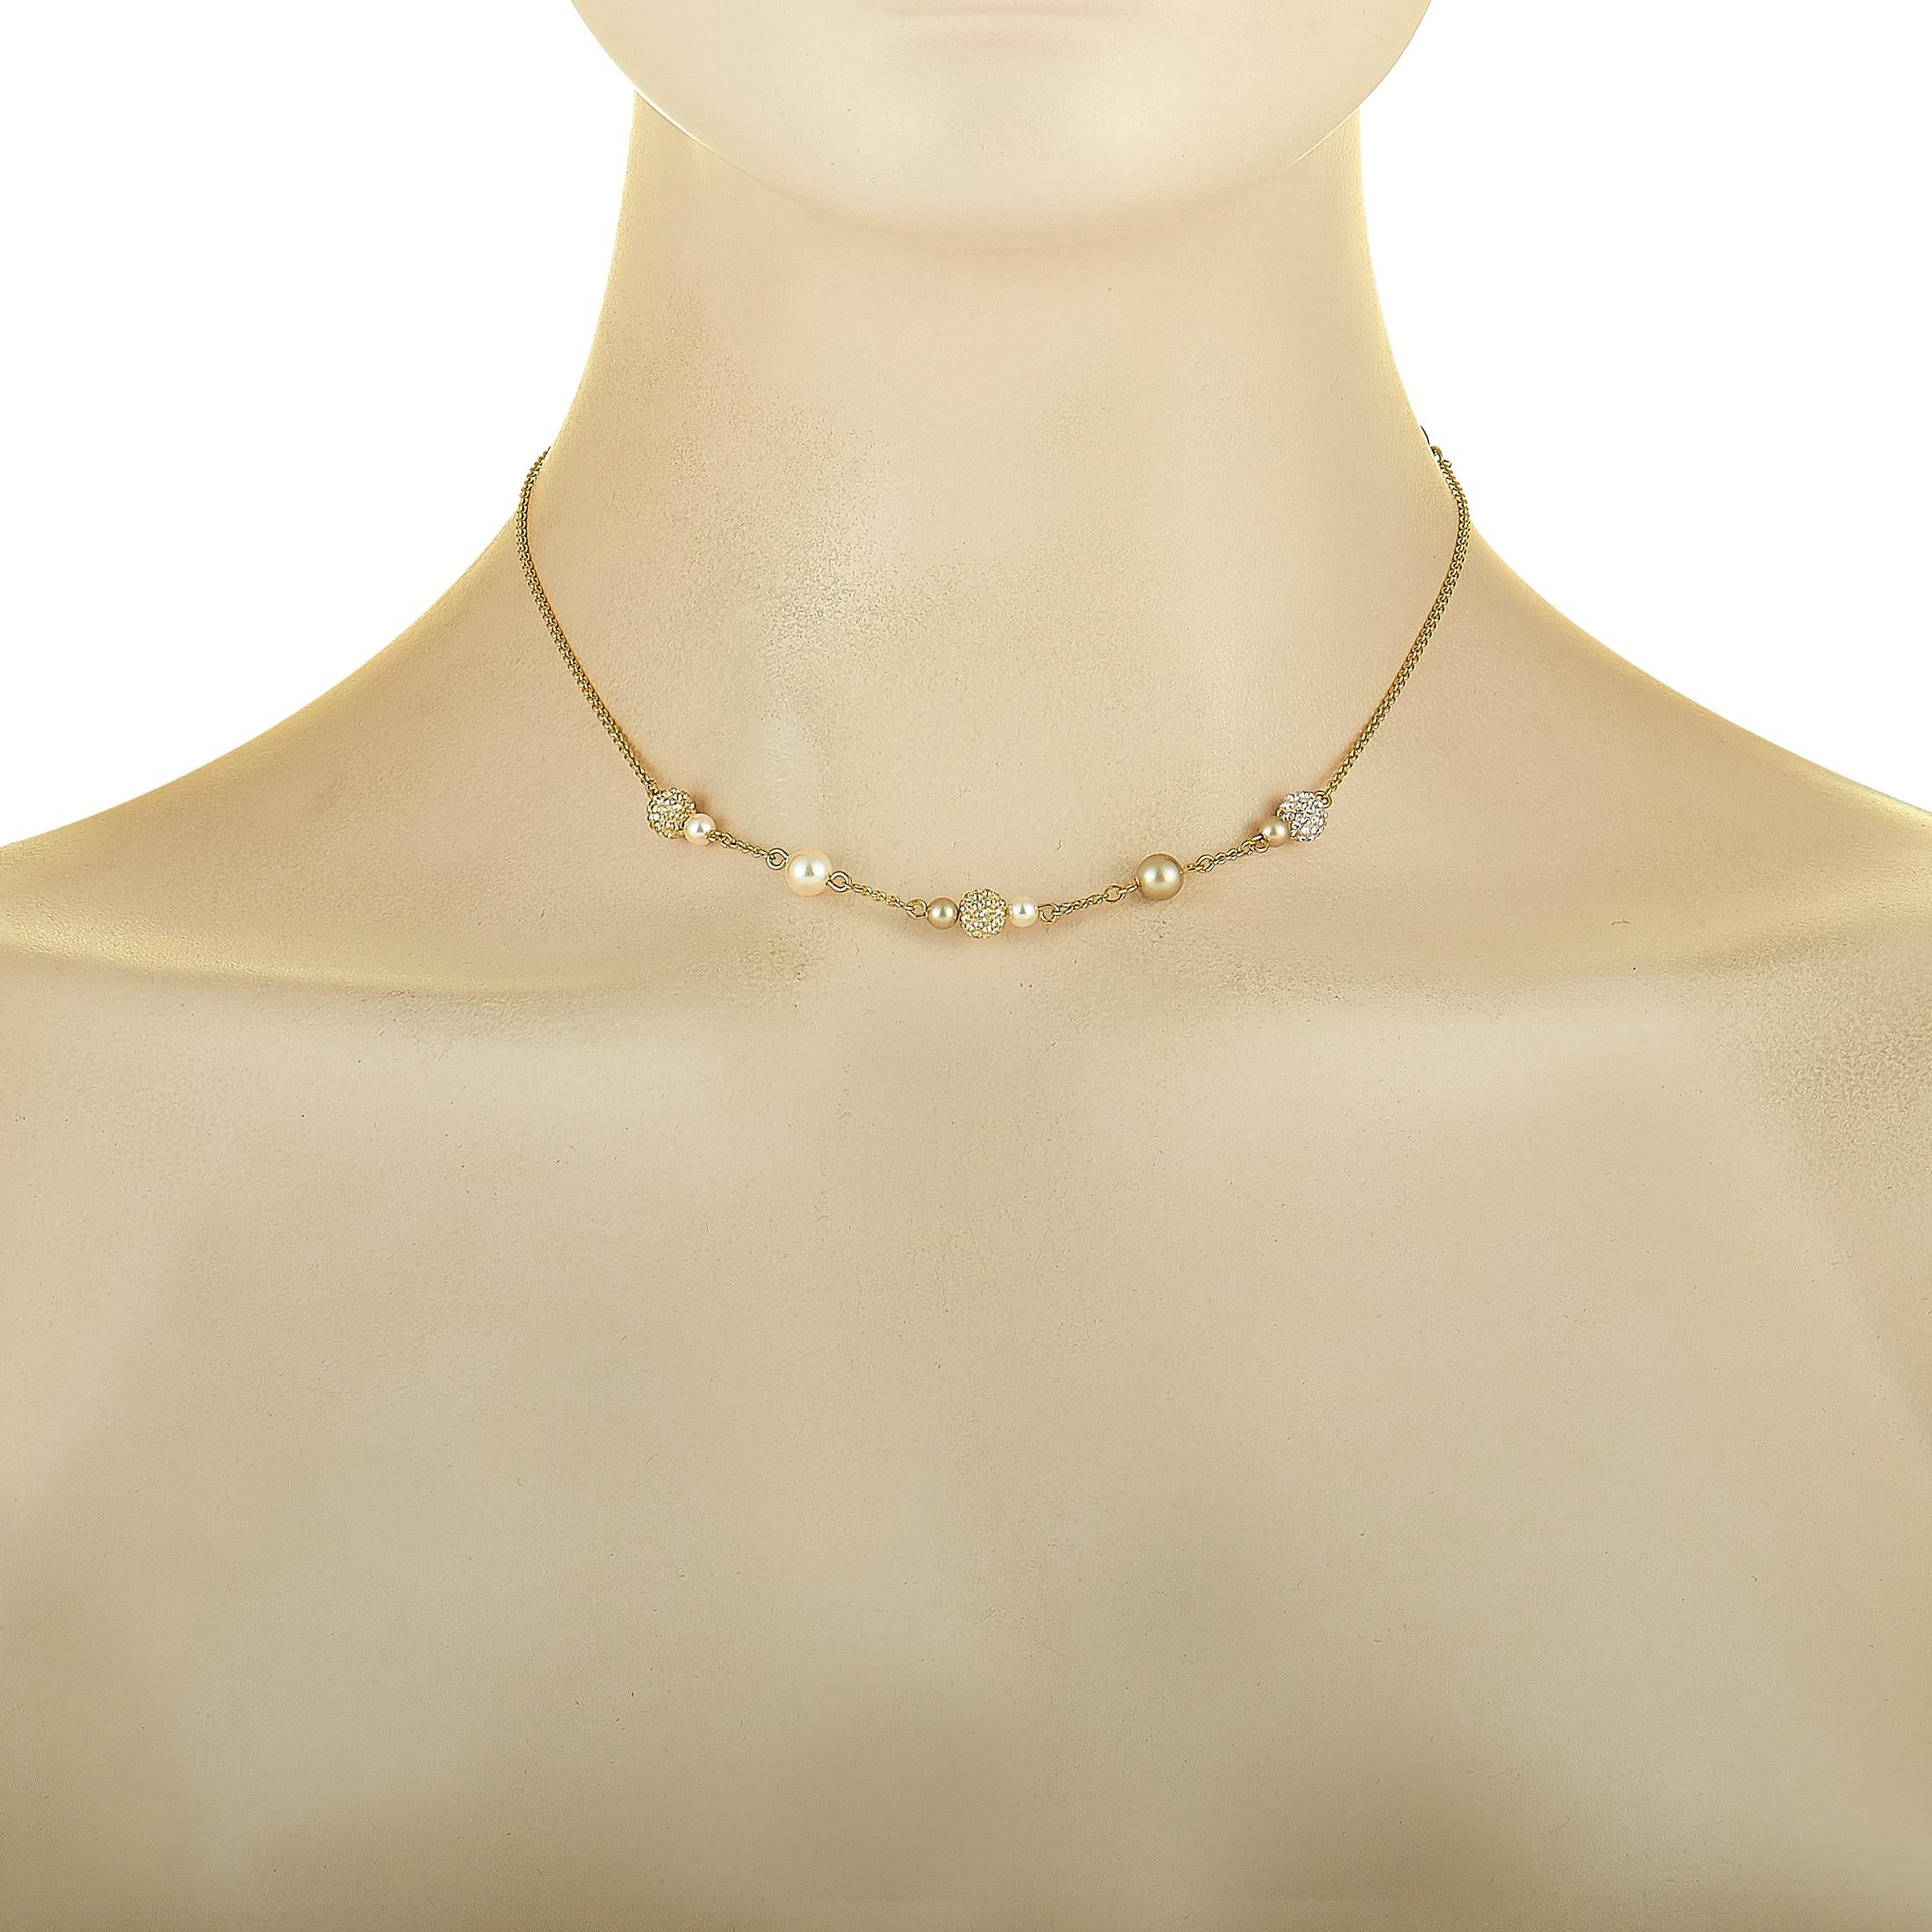 The Swarovski “Lady Jane” necklace is crafted from 23K yellow gold-plated stainless steel and decorated with Swarovski crystals and crystal pearls. The necklace weighs 5.5 grams and measures 16” in length.